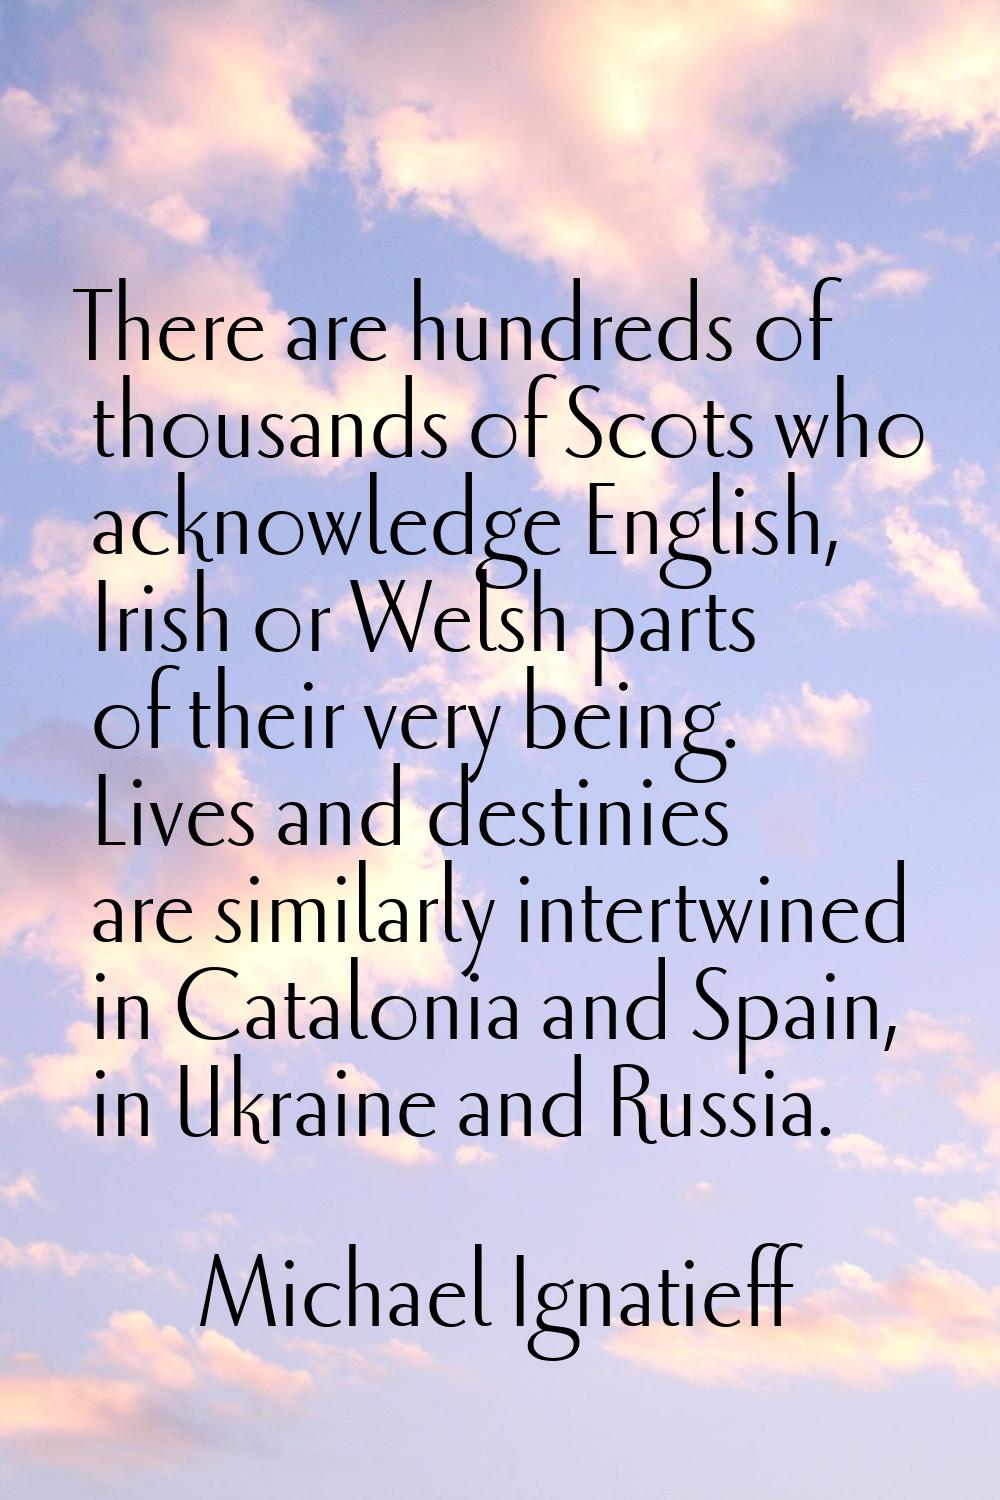 There are hundreds of thousands of Scots who acknowledge English, Irish or Welsh parts of their ver